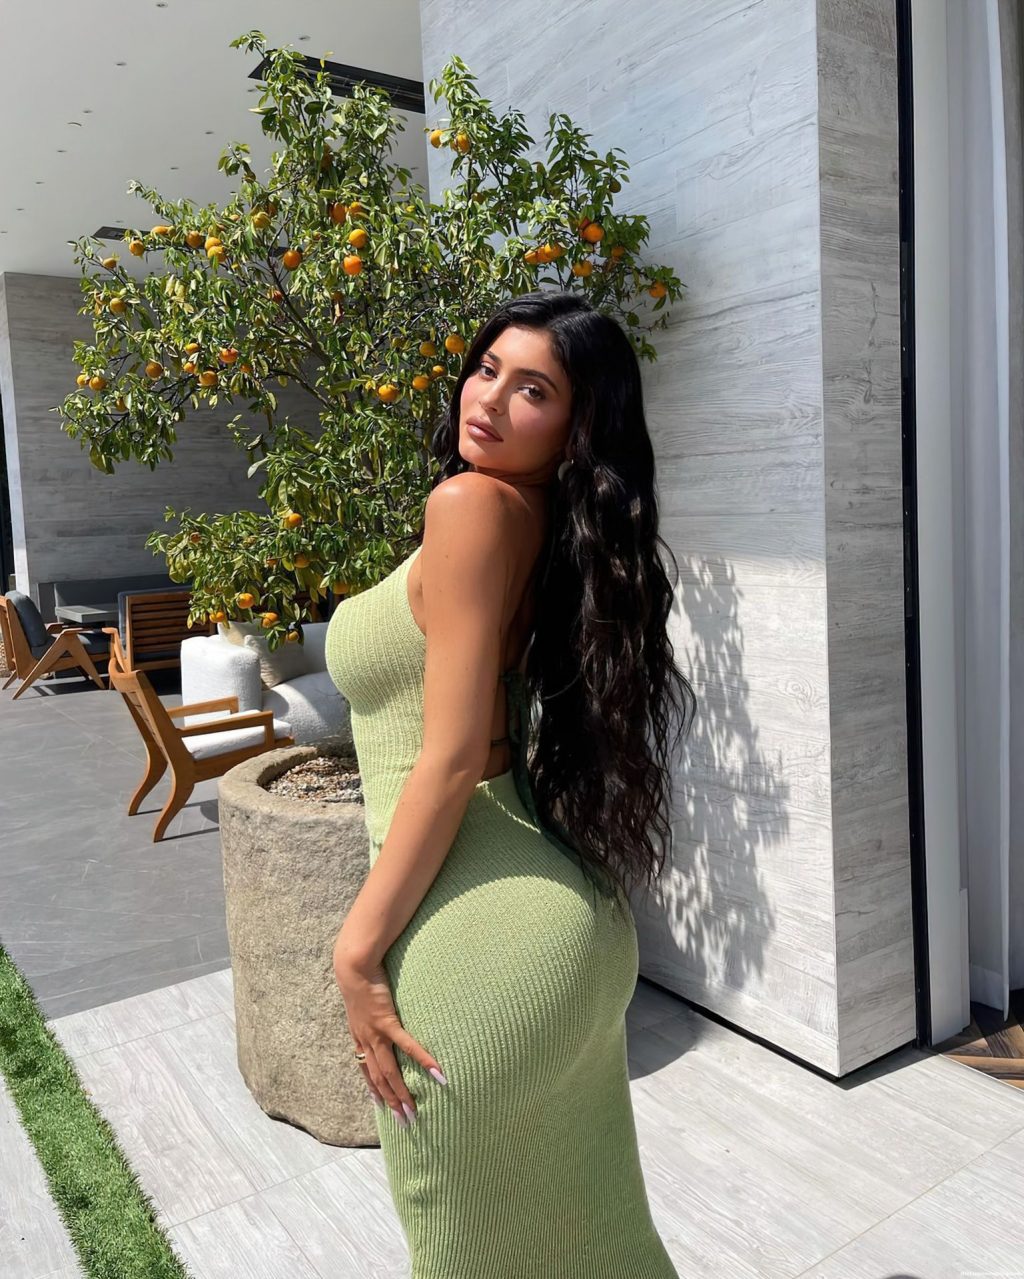 Kylie Jenner Looks Hot at The Party (6 Hot Photos)